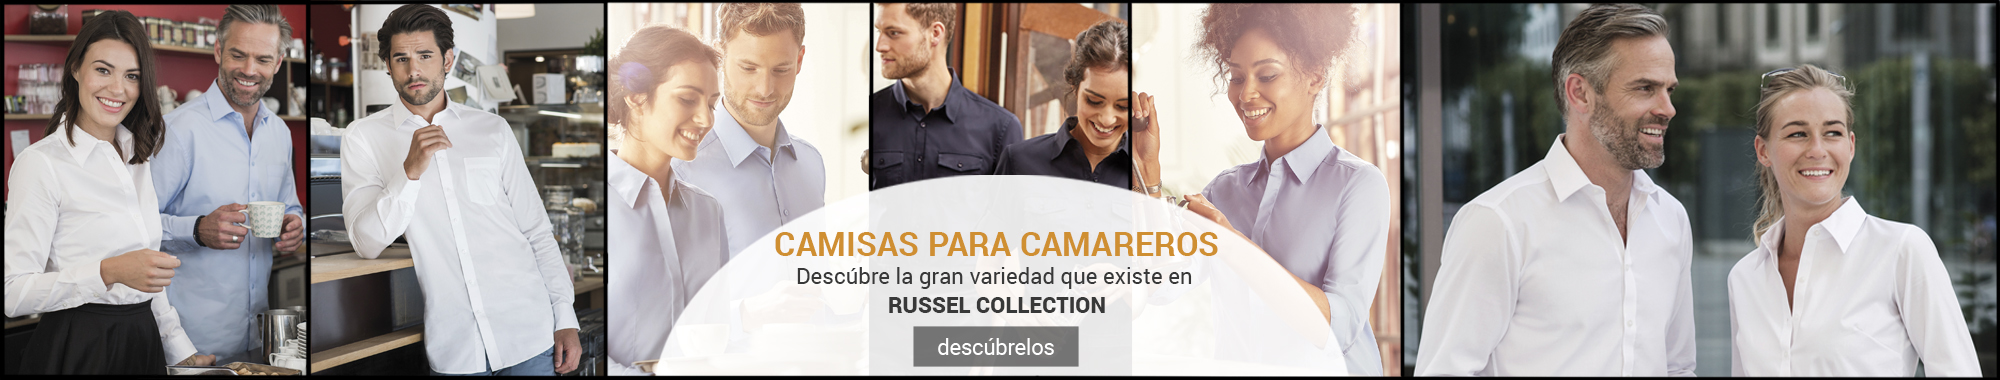 Camisas de RUSSELL COLLECTION